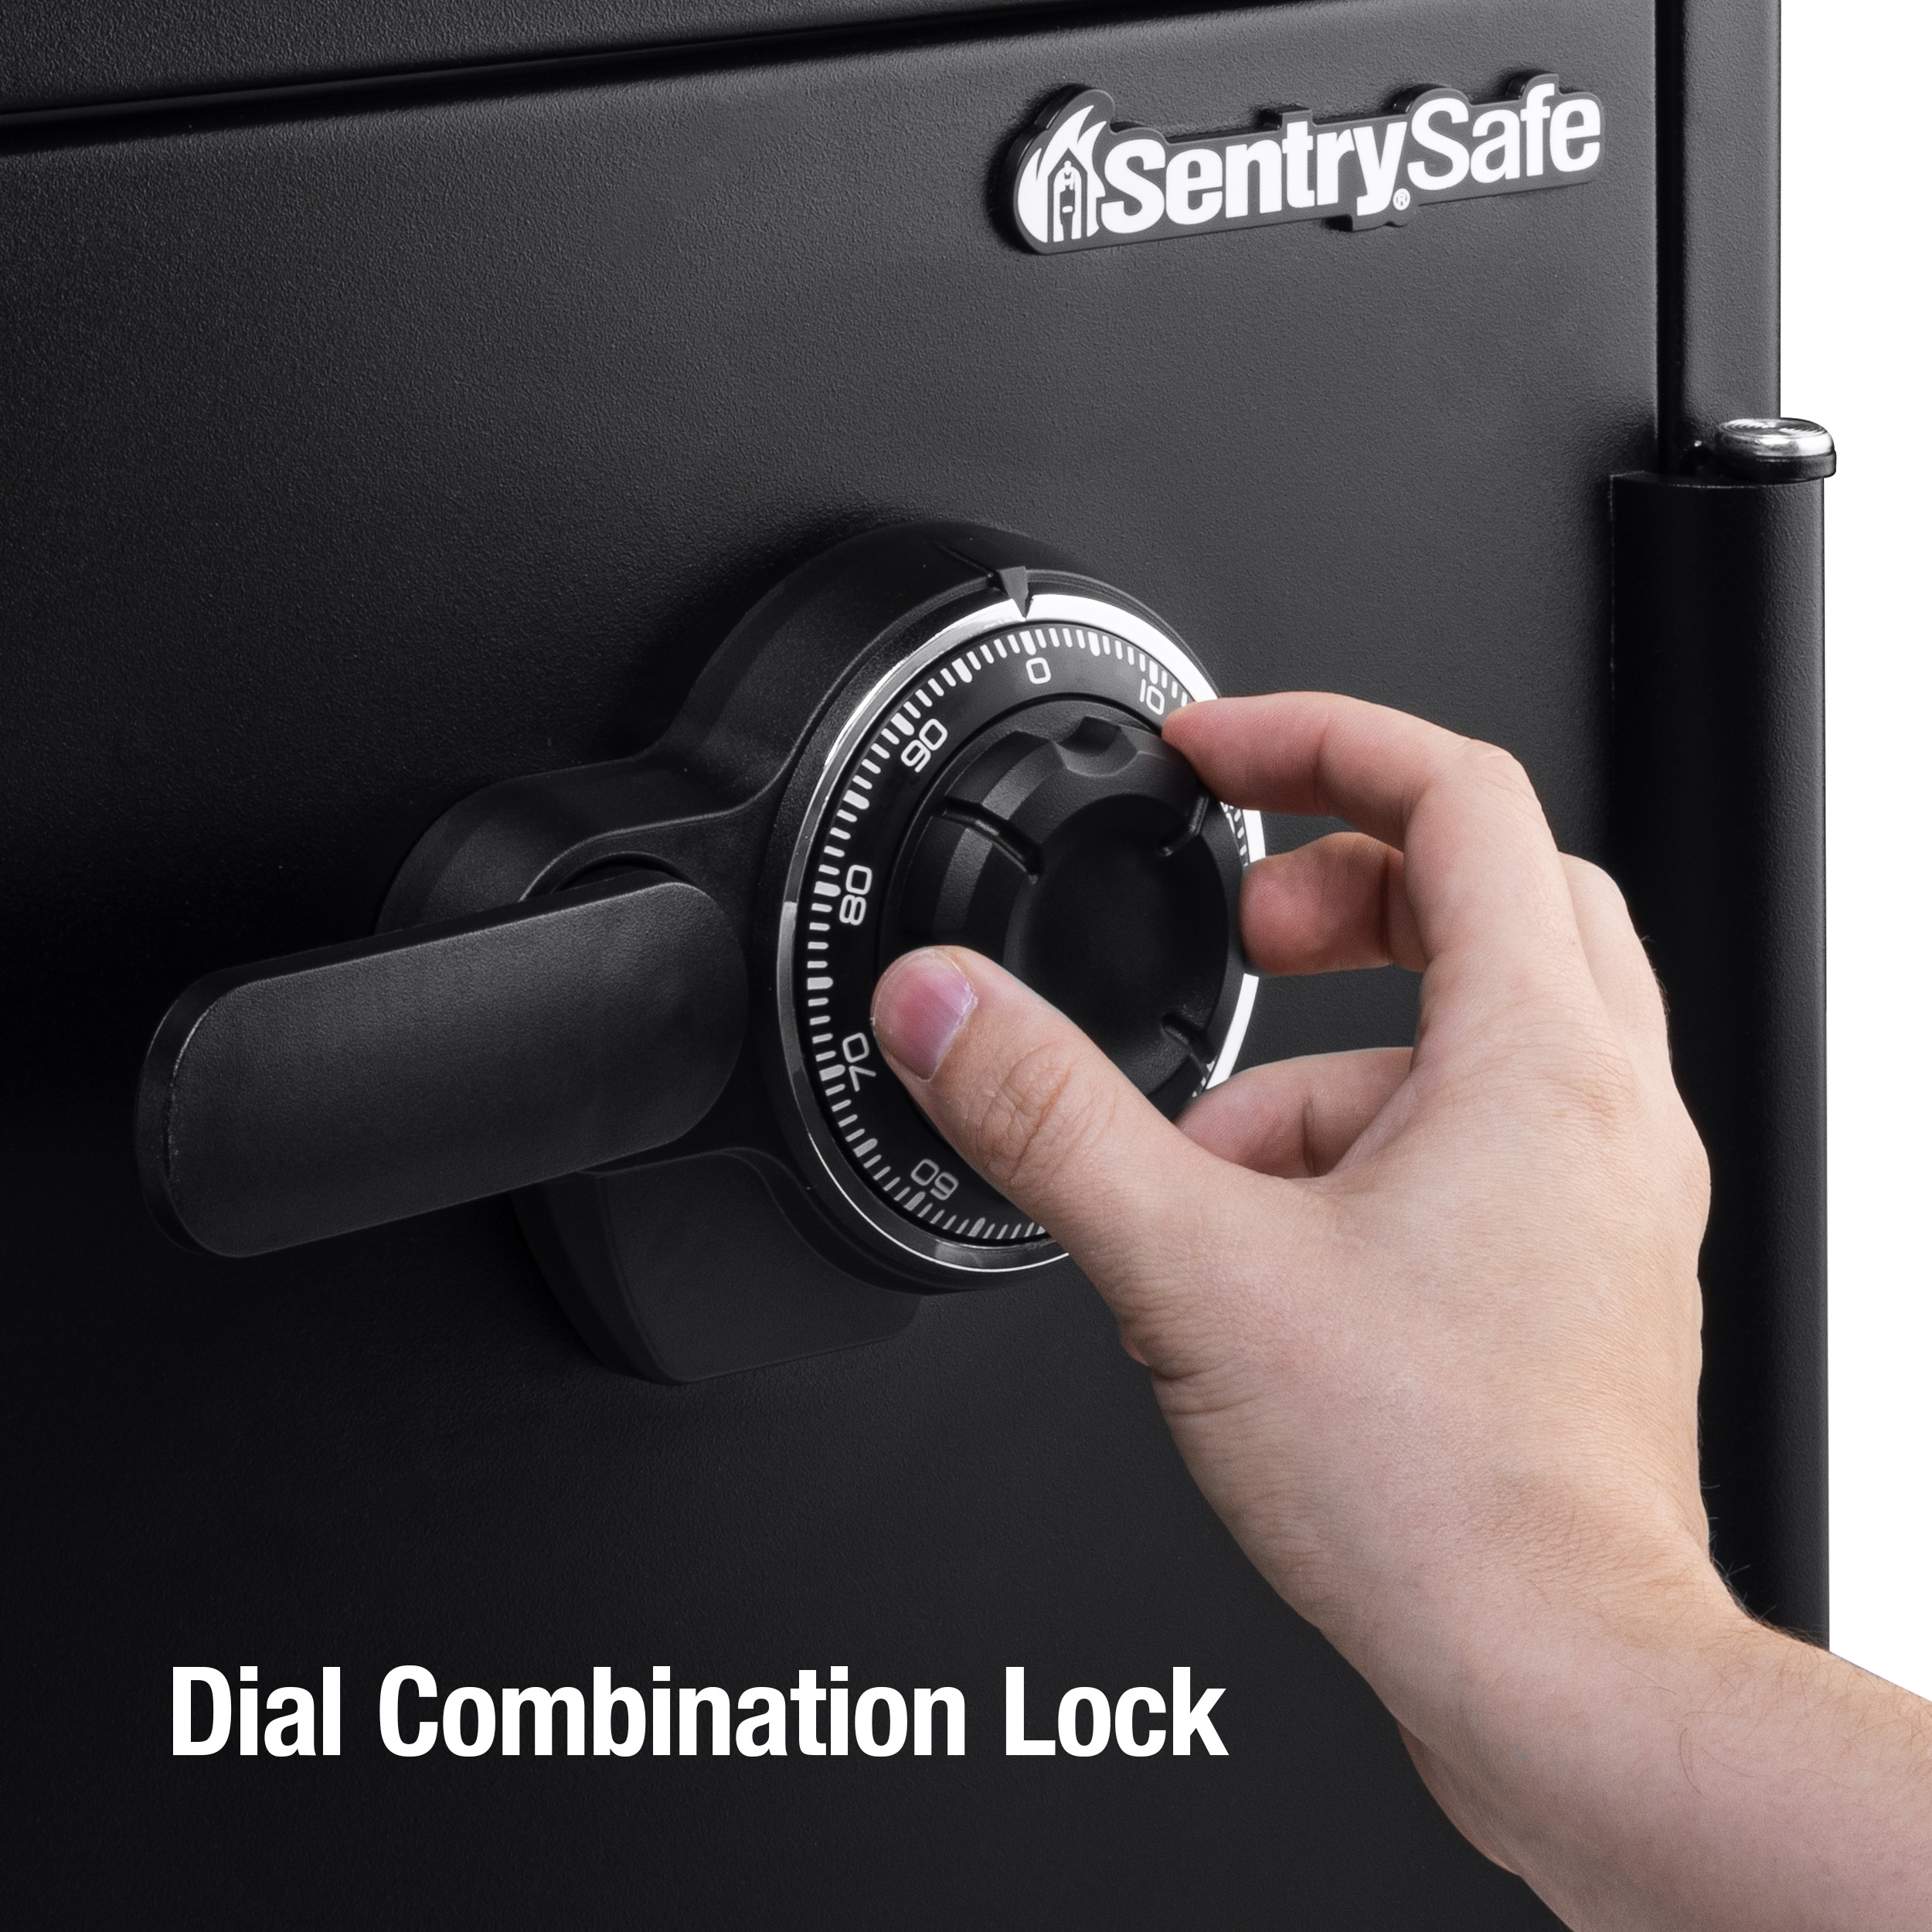 SentrySafe SFW123CS Fire-Resistant Safe and Waterproof Safe with Dial Combination Lock, 1.23 cu. ft. - image 5 of 7